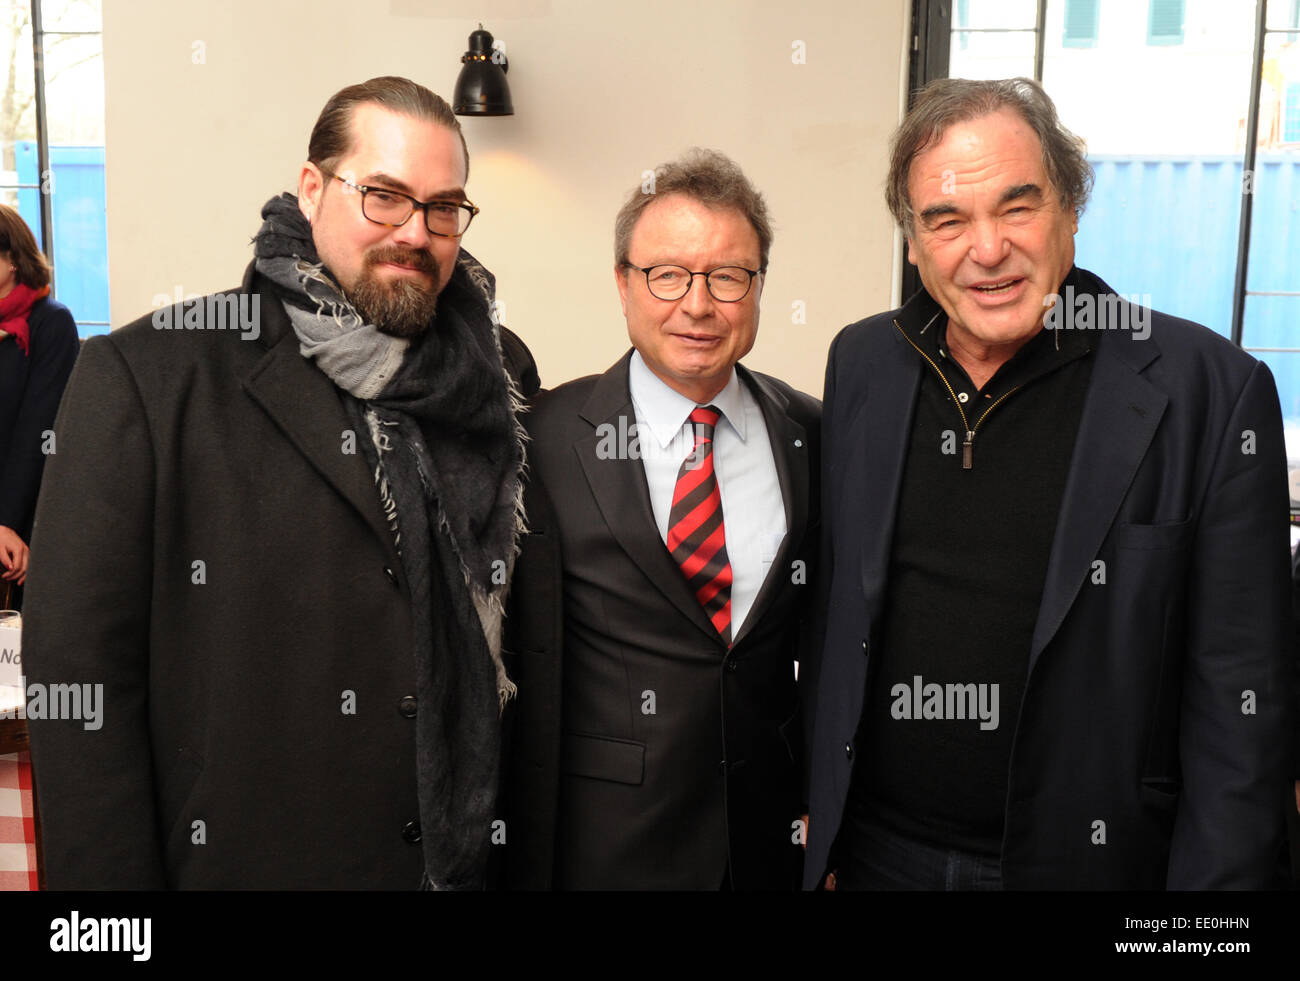 Producer Philip Schulz-Deyle (L-R), CEO of FFF Bayern, Klaus Schaefer, and the US-American director Oliver Stone at a press lunch with the FilmFernsehFonds Bayern (FFF Bayern  - Bavarian Film and Television Fund) in Munich, Bavaria, 12 January 2015. Photo: TOBIAS HASE/dpa Stock Photo